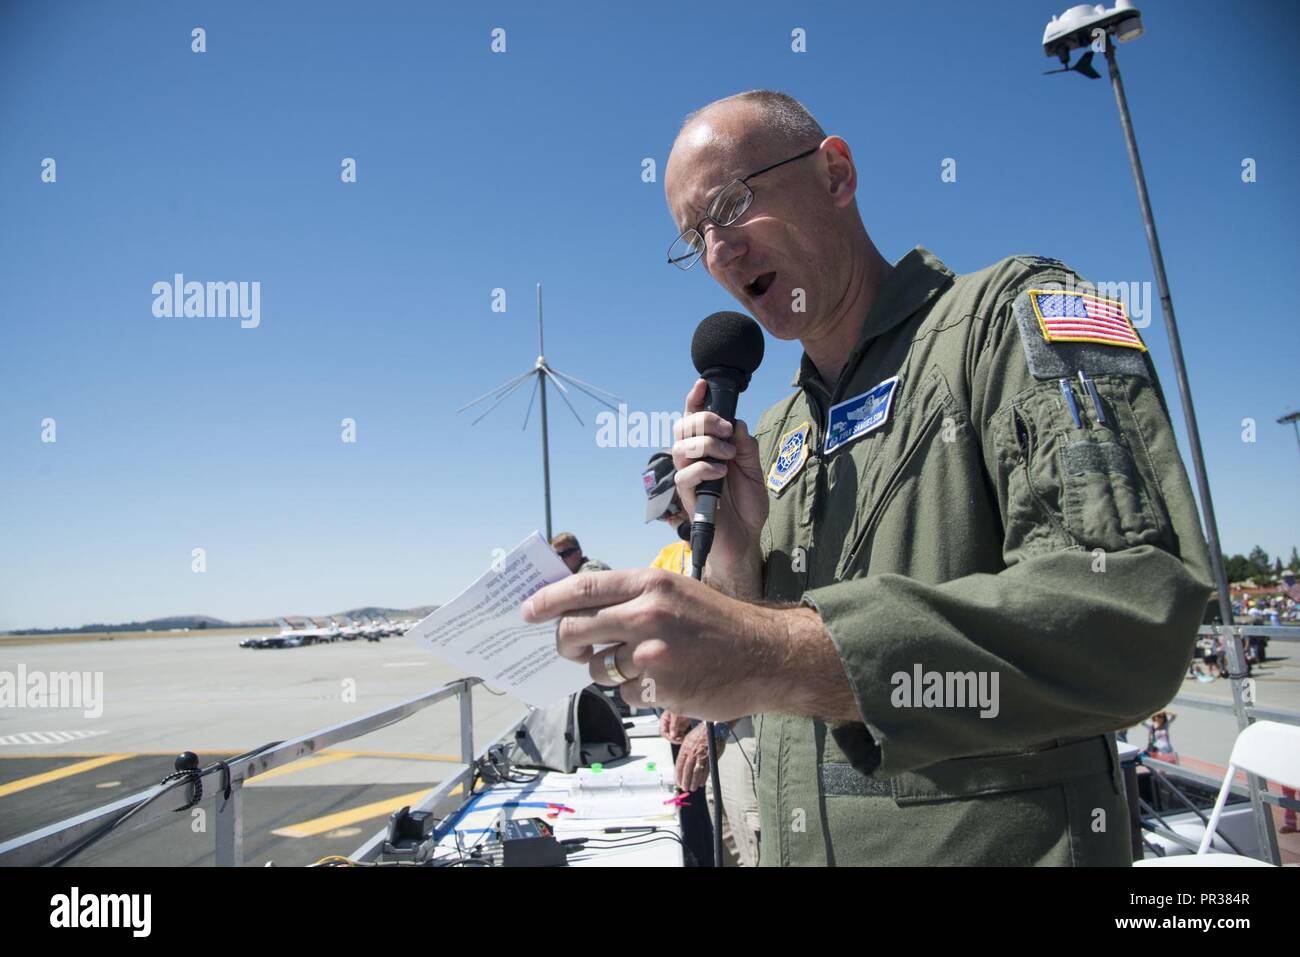 Col. Ryan Samuelson, 92nd Air Refueling Wing commander, thanked service members and members of the local community for their support during the SkyFest 2017 Air Show and Open House at Fairchild Air Force Base, Washington. SkyFest was hosted to thank the local and regional community for their support and give them the opportunity to meet Airmen and learn about the Air Force mission. Stock Photo